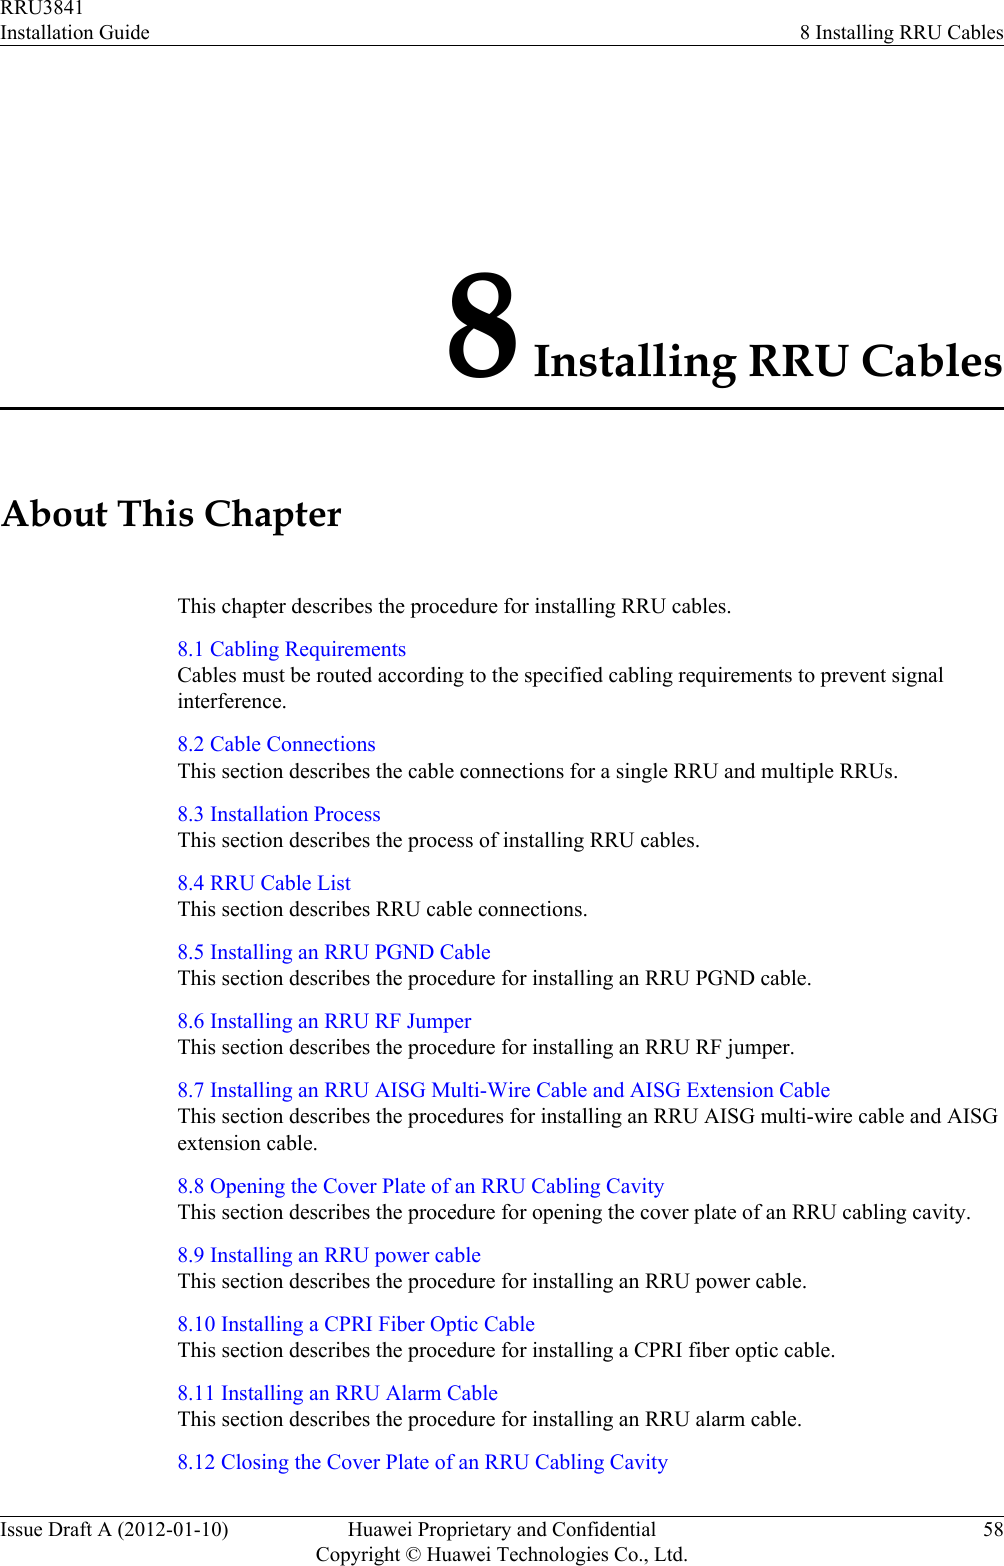 8 Installing RRU CablesAbout This ChapterThis chapter describes the procedure for installing RRU cables.8.1 Cabling RequirementsCables must be routed according to the specified cabling requirements to prevent signalinterference.8.2 Cable ConnectionsThis section describes the cable connections for a single RRU and multiple RRUs.8.3 Installation ProcessThis section describes the process of installing RRU cables.8.4 RRU Cable ListThis section describes RRU cable connections.8.5 Installing an RRU PGND CableThis section describes the procedure for installing an RRU PGND cable.8.6 Installing an RRU RF JumperThis section describes the procedure for installing an RRU RF jumper.8.7 Installing an RRU AISG Multi-Wire Cable and AISG Extension CableThis section describes the procedures for installing an RRU AISG multi-wire cable and AISGextension cable.8.8 Opening the Cover Plate of an RRU Cabling CavityThis section describes the procedure for opening the cover plate of an RRU cabling cavity.8.9 Installing an RRU power cableThis section describes the procedure for installing an RRU power cable.8.10 Installing a CPRI Fiber Optic CableThis section describes the procedure for installing a CPRI fiber optic cable.8.11 Installing an RRU Alarm CableThis section describes the procedure for installing an RRU alarm cable.8.12 Closing the Cover Plate of an RRU Cabling CavityRRU3841Installation Guide 8 Installing RRU CablesIssue Draft A (2012-01-10) Huawei Proprietary and ConfidentialCopyright © Huawei Technologies Co., Ltd.58